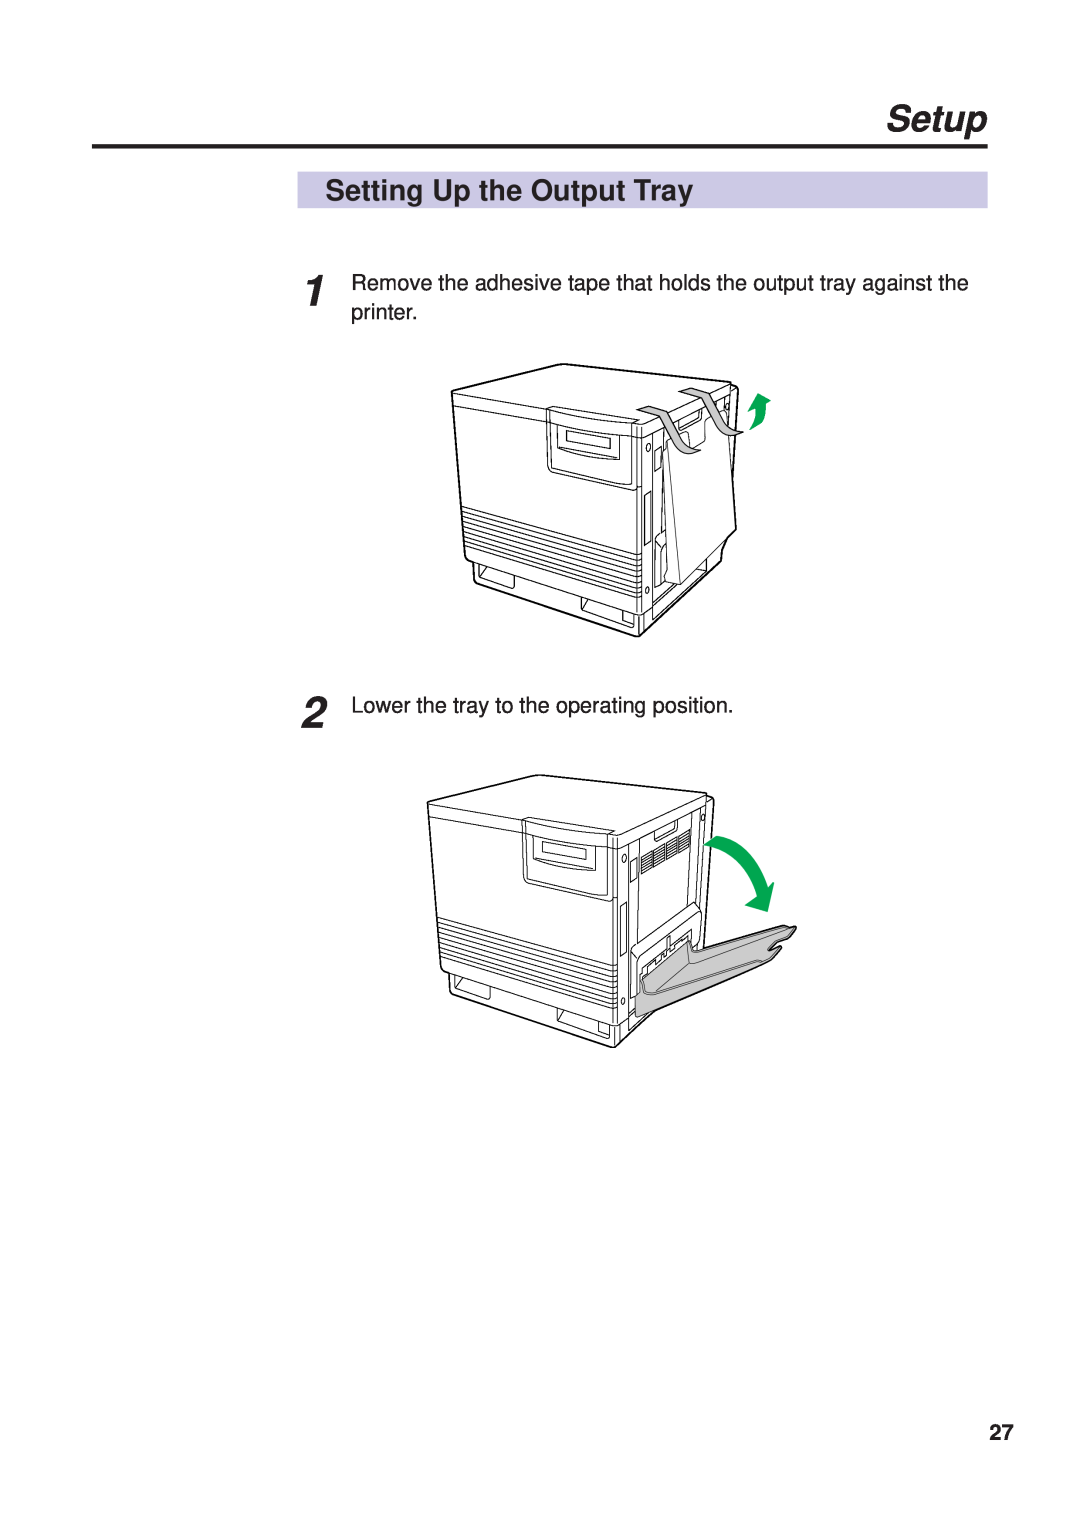 Panasonic KX-PS8000 manual Setup, Setting Up the Output Tray, Lower the tray to the operating position 